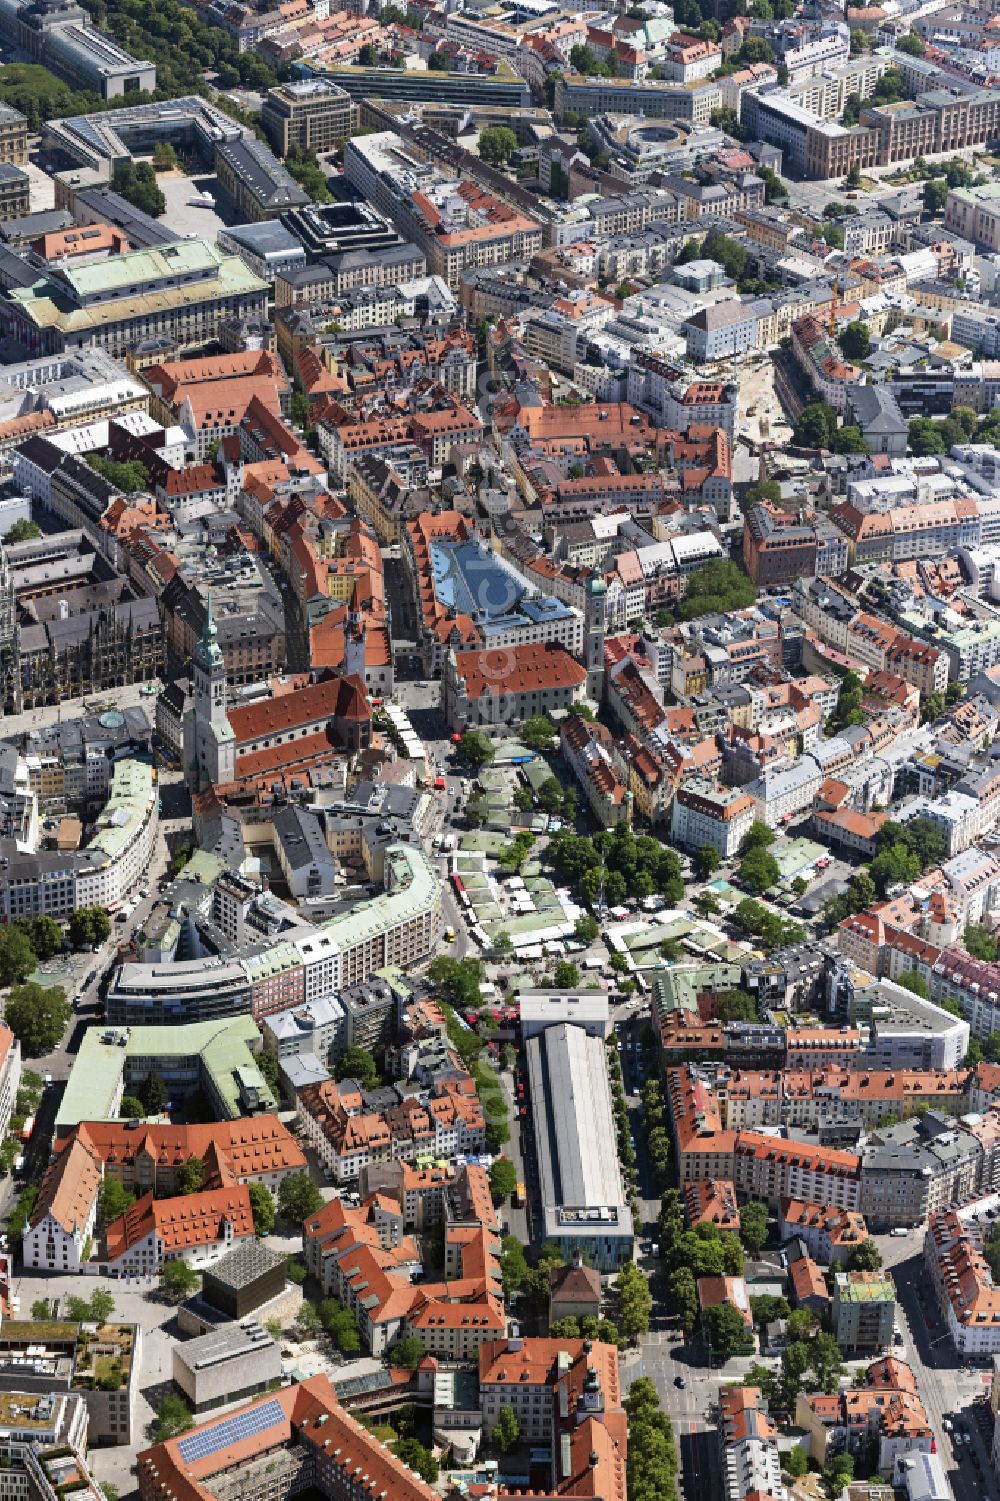 Aerial photograph München - Old town center around the Viktualienmarkt in Munich in the state of Bavaria. The food market is surrounded by the Schrannenhalle and the churches Alter Peter and Heilig Geist